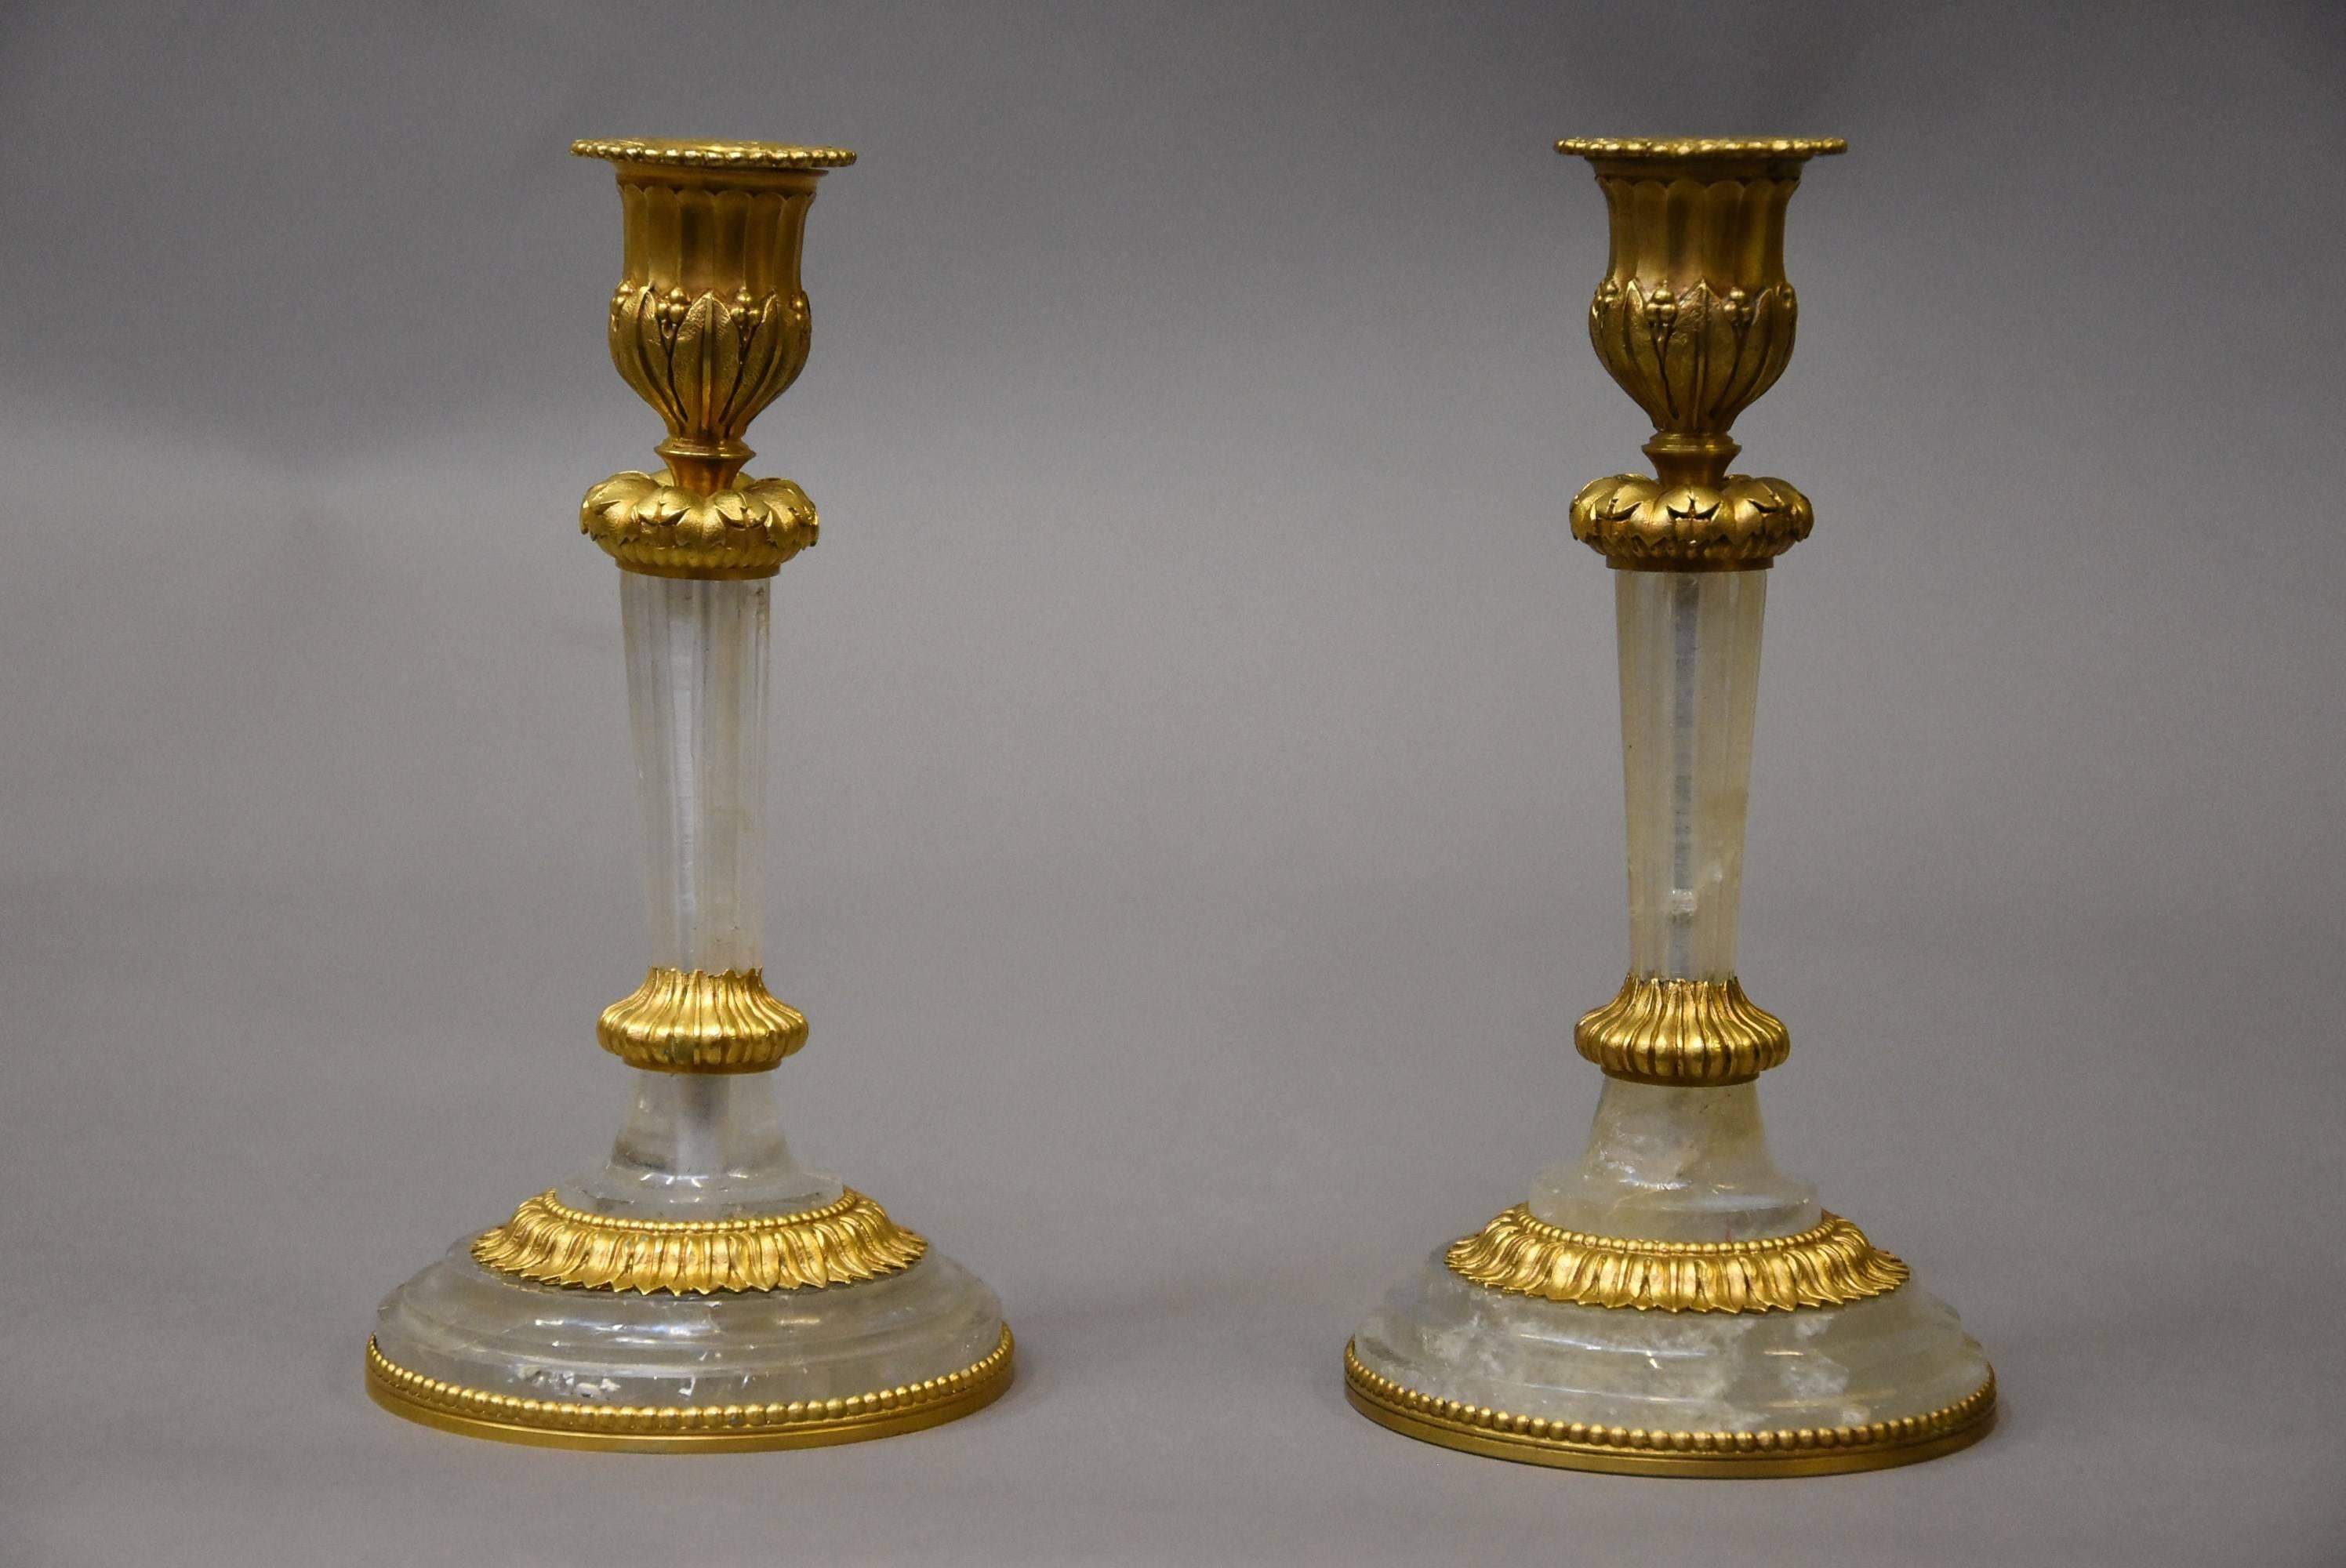 Pair of Elegant Early 20th Century Rock Crystal and Ormolu Candlesticks For Sale 1